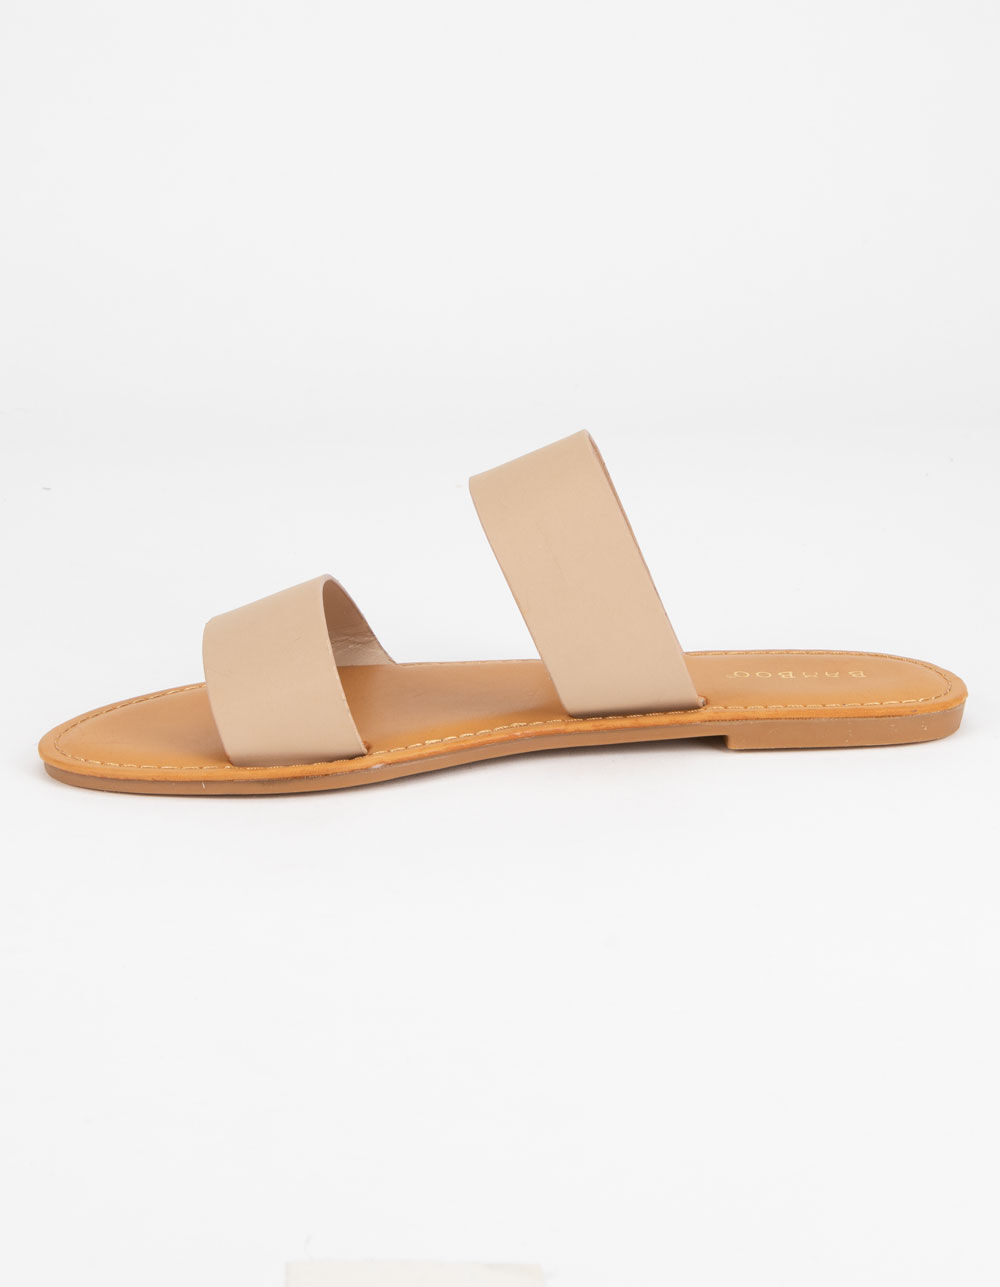 BAMBOO Double Strap Nude Womens Sandals - NUDE | Tillys